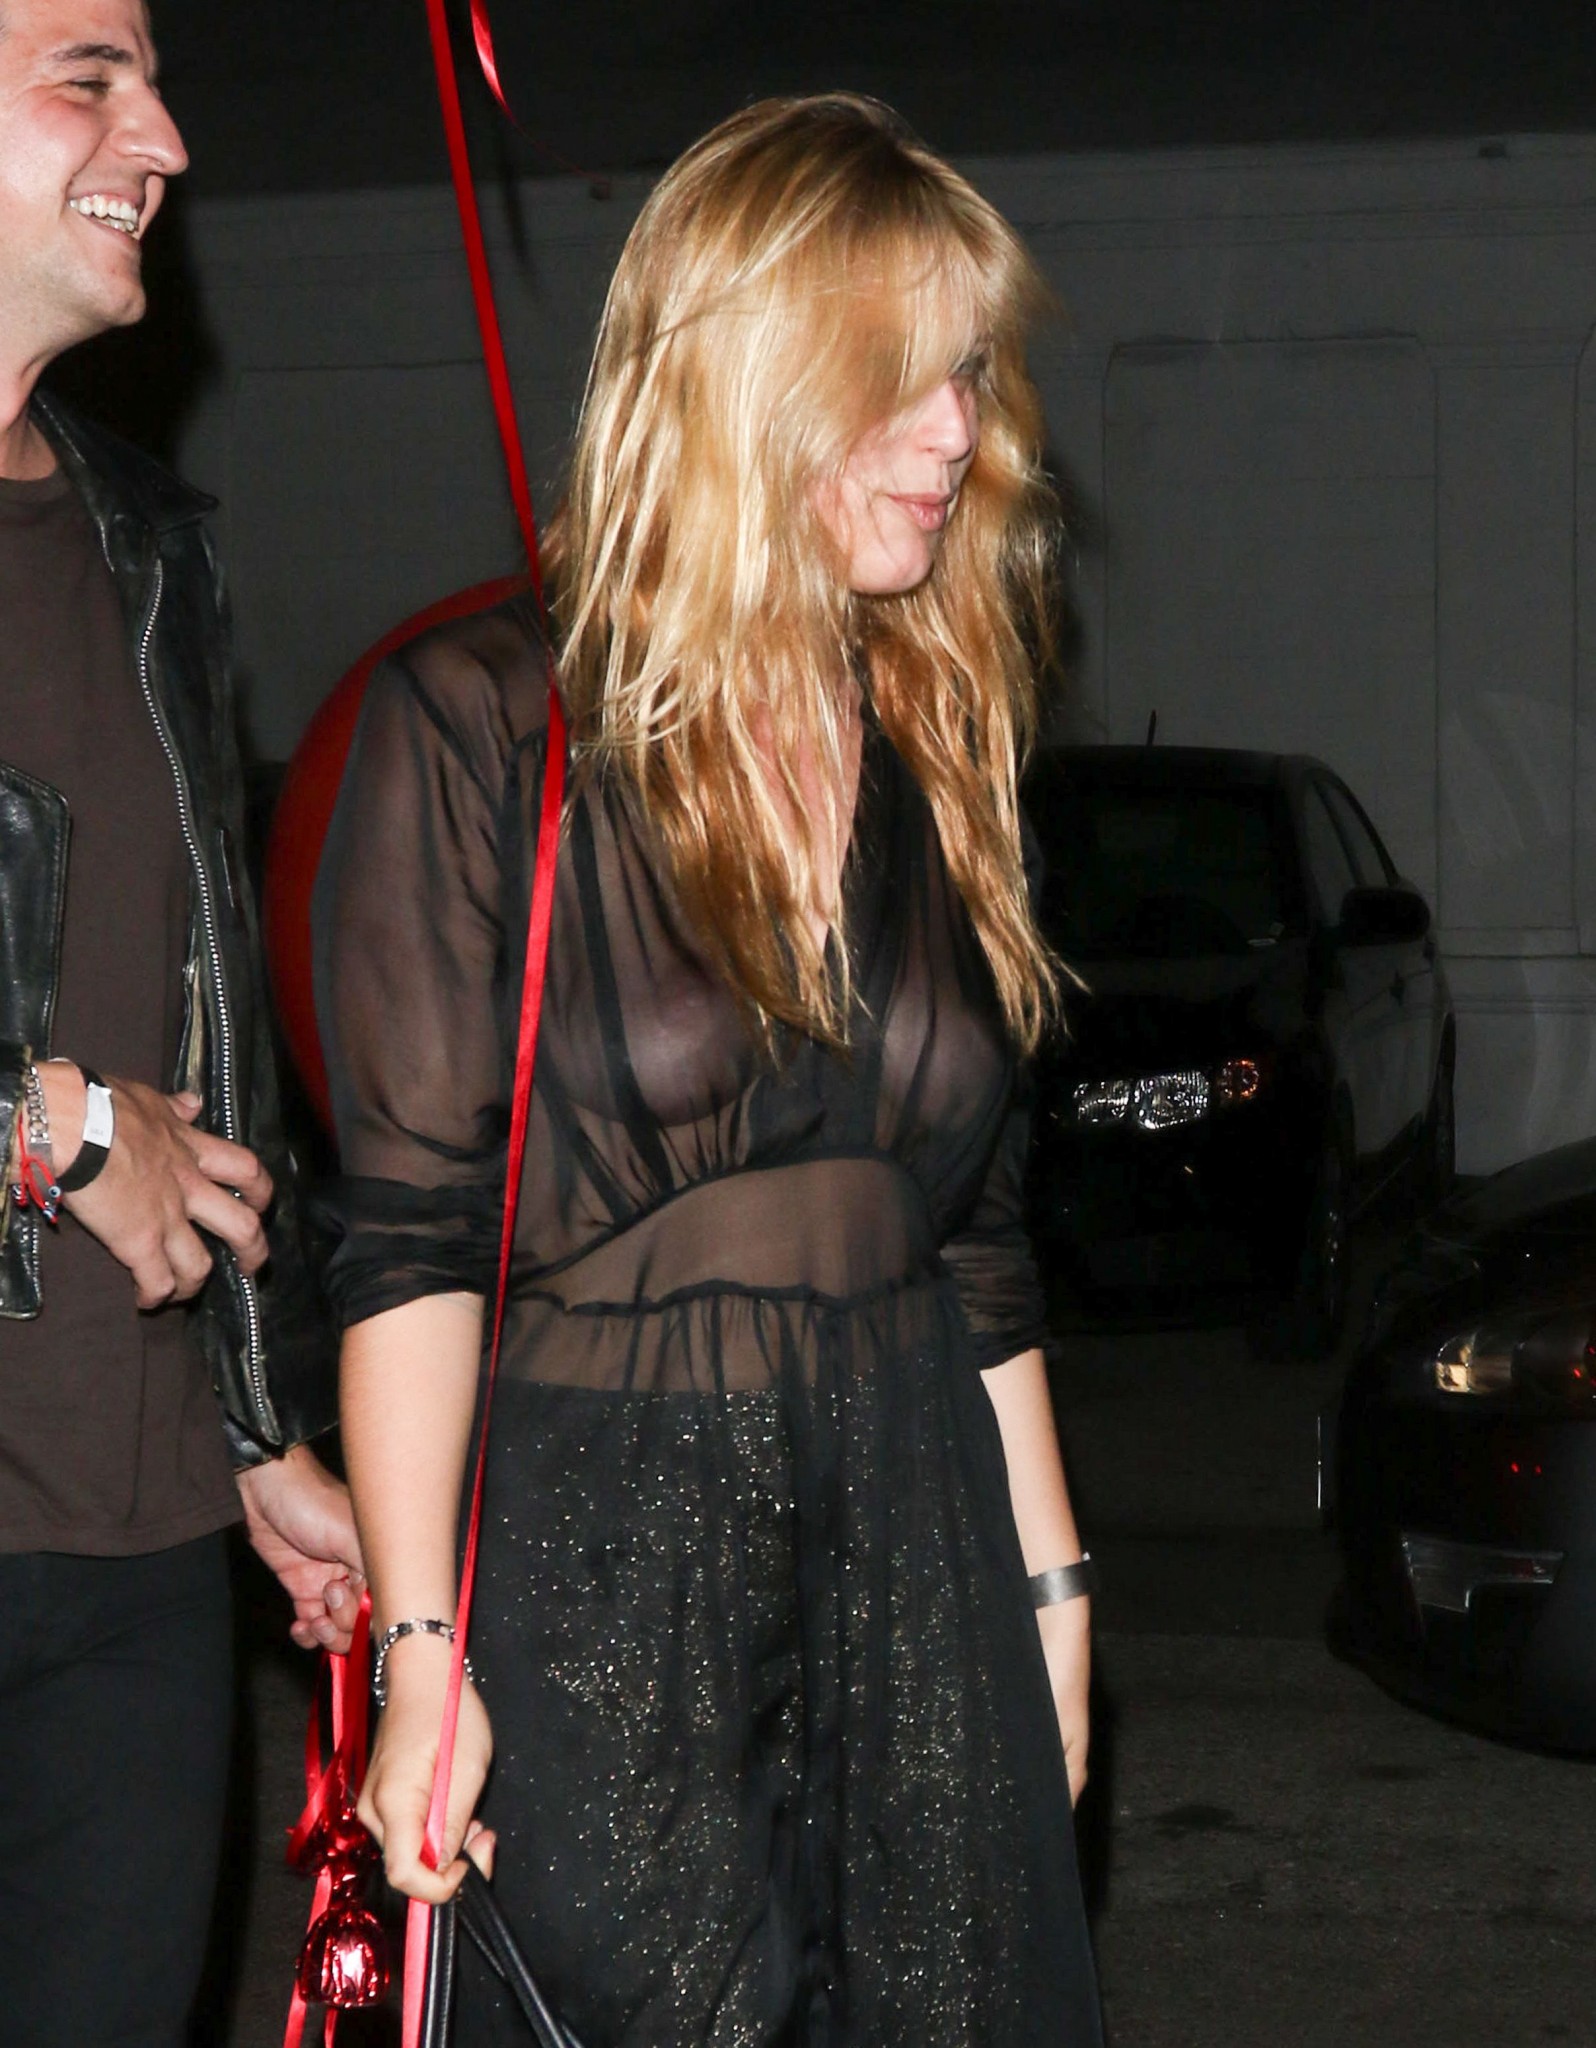 Scout Willis Wearing A See Through (To Nipples) Top In Los Angeles.